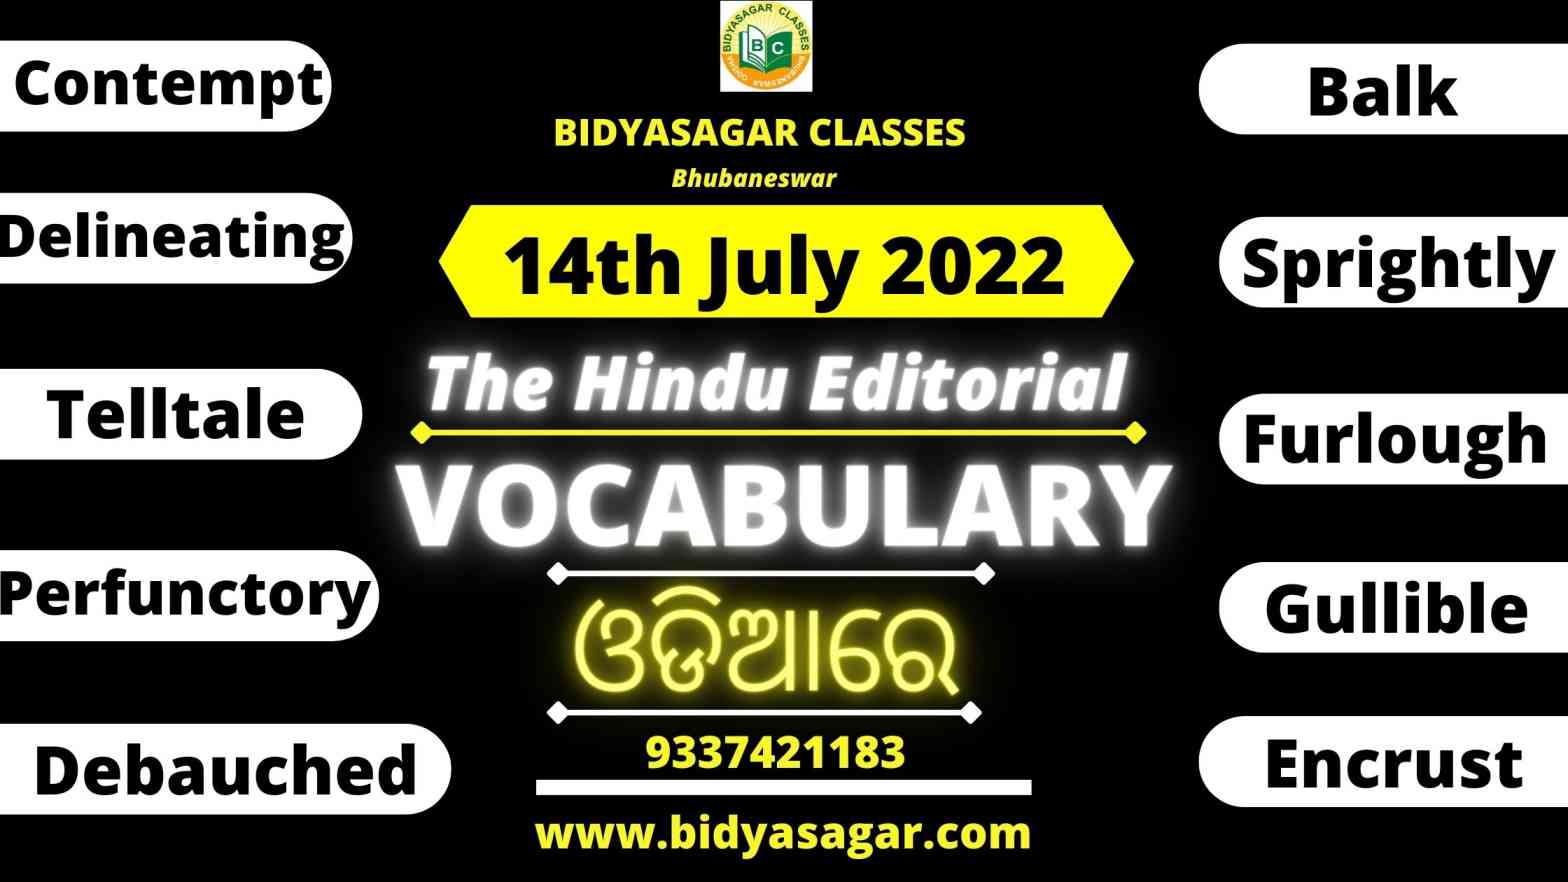 The Hindu Editorial Vocabulary of 14th July 2022